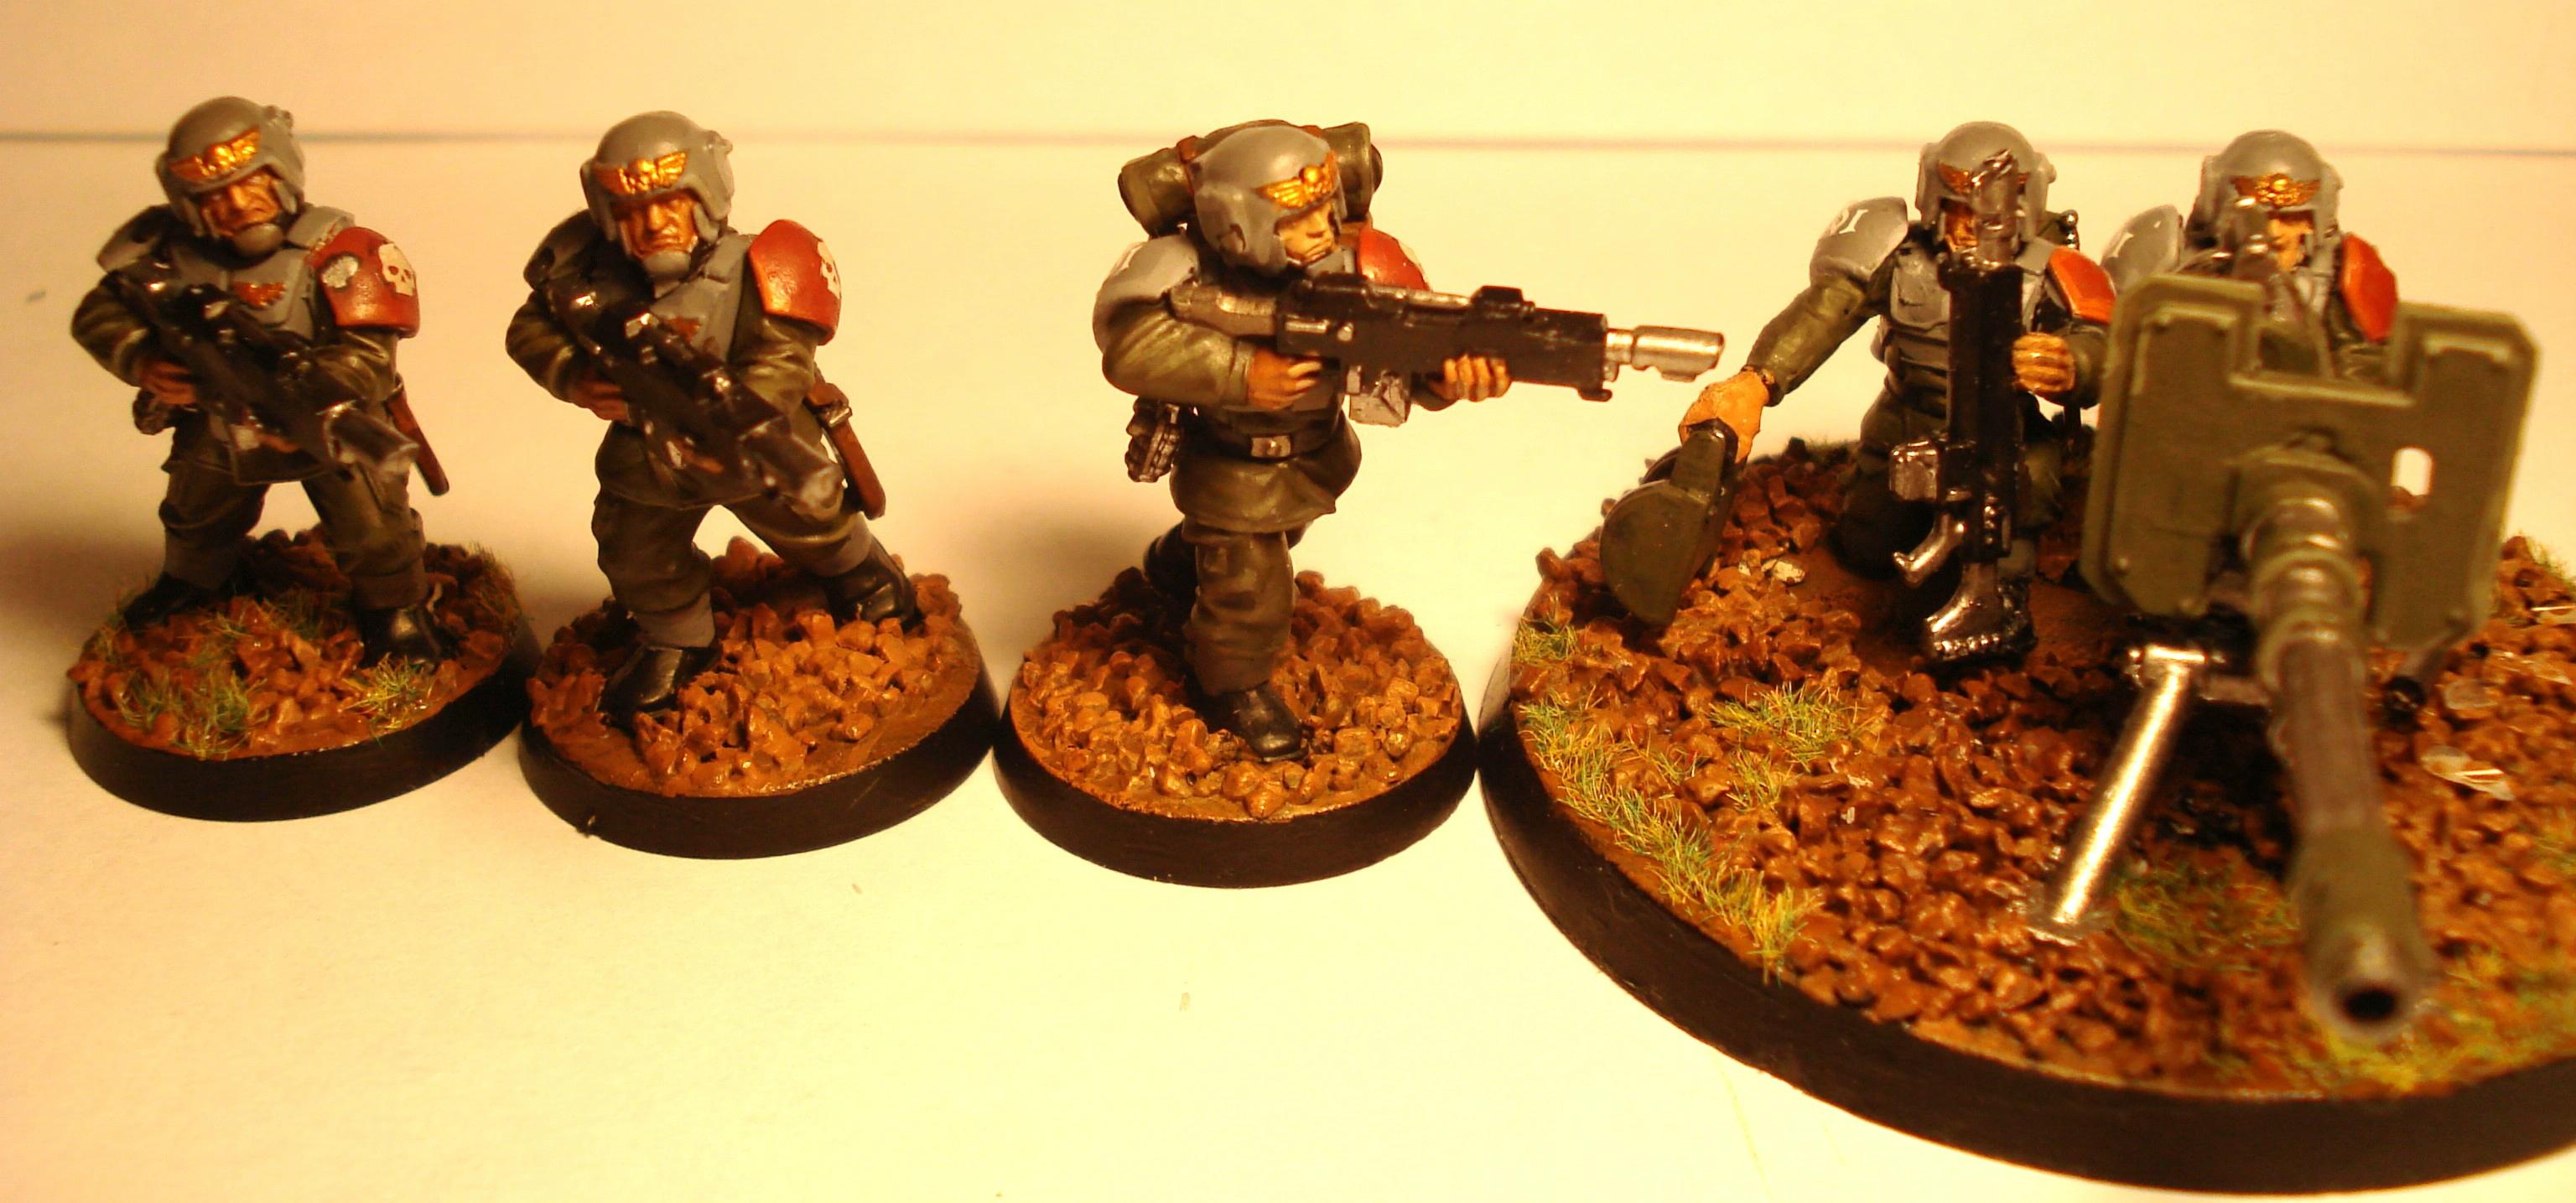 Based, Cadians, Imperial Guard, Warhammer 40,000